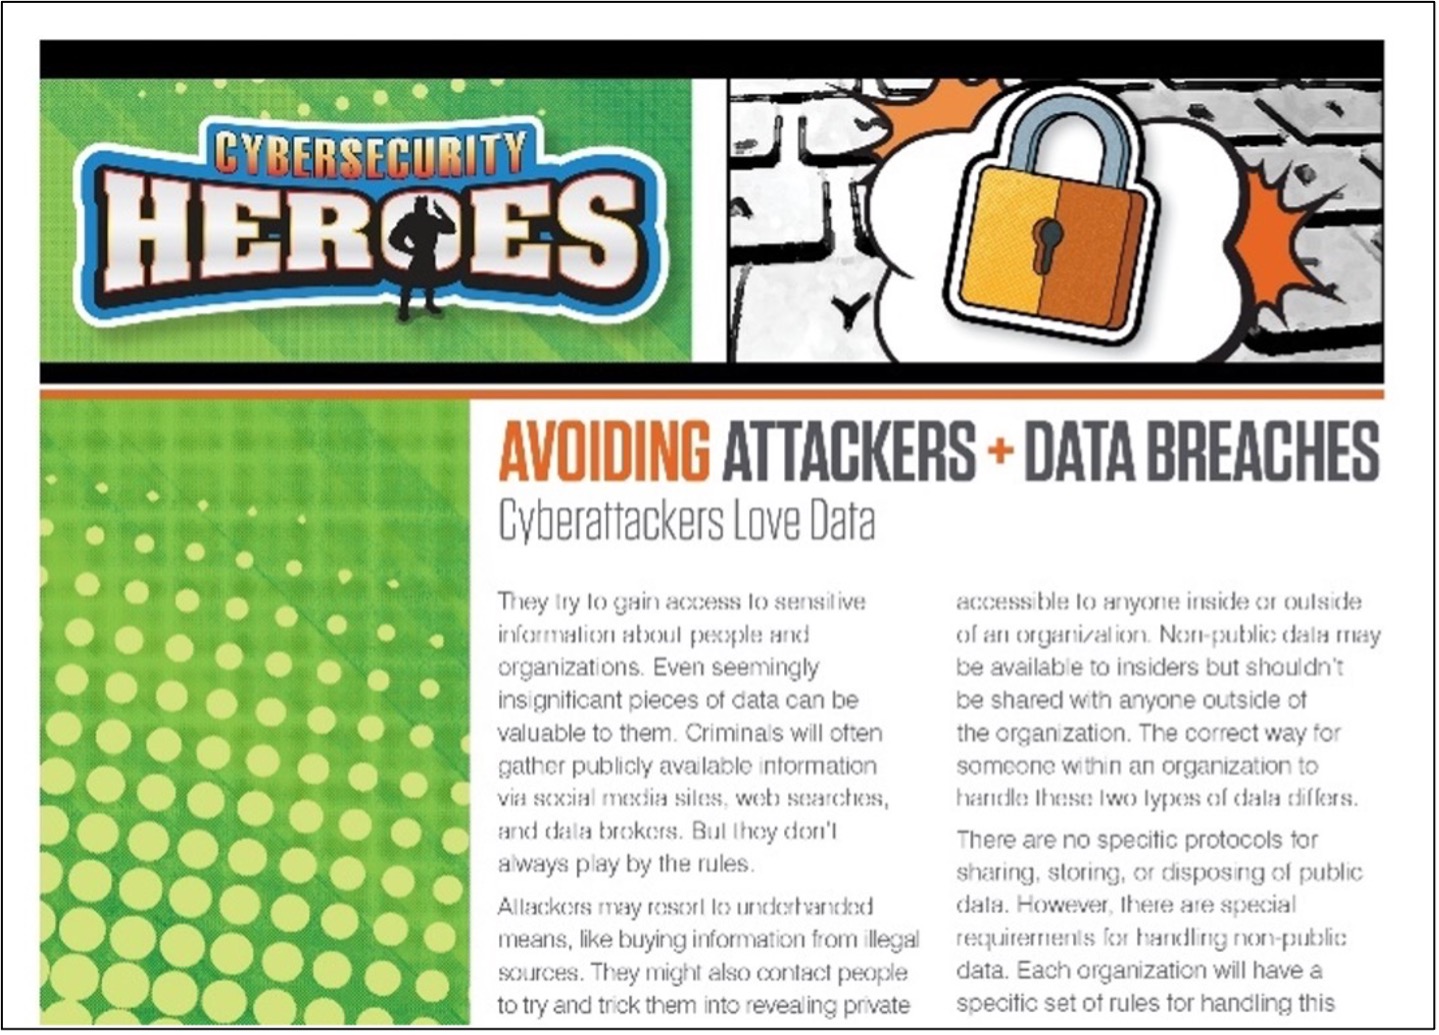 Article from the ‘Cybersecurity Heroes’ Campaign